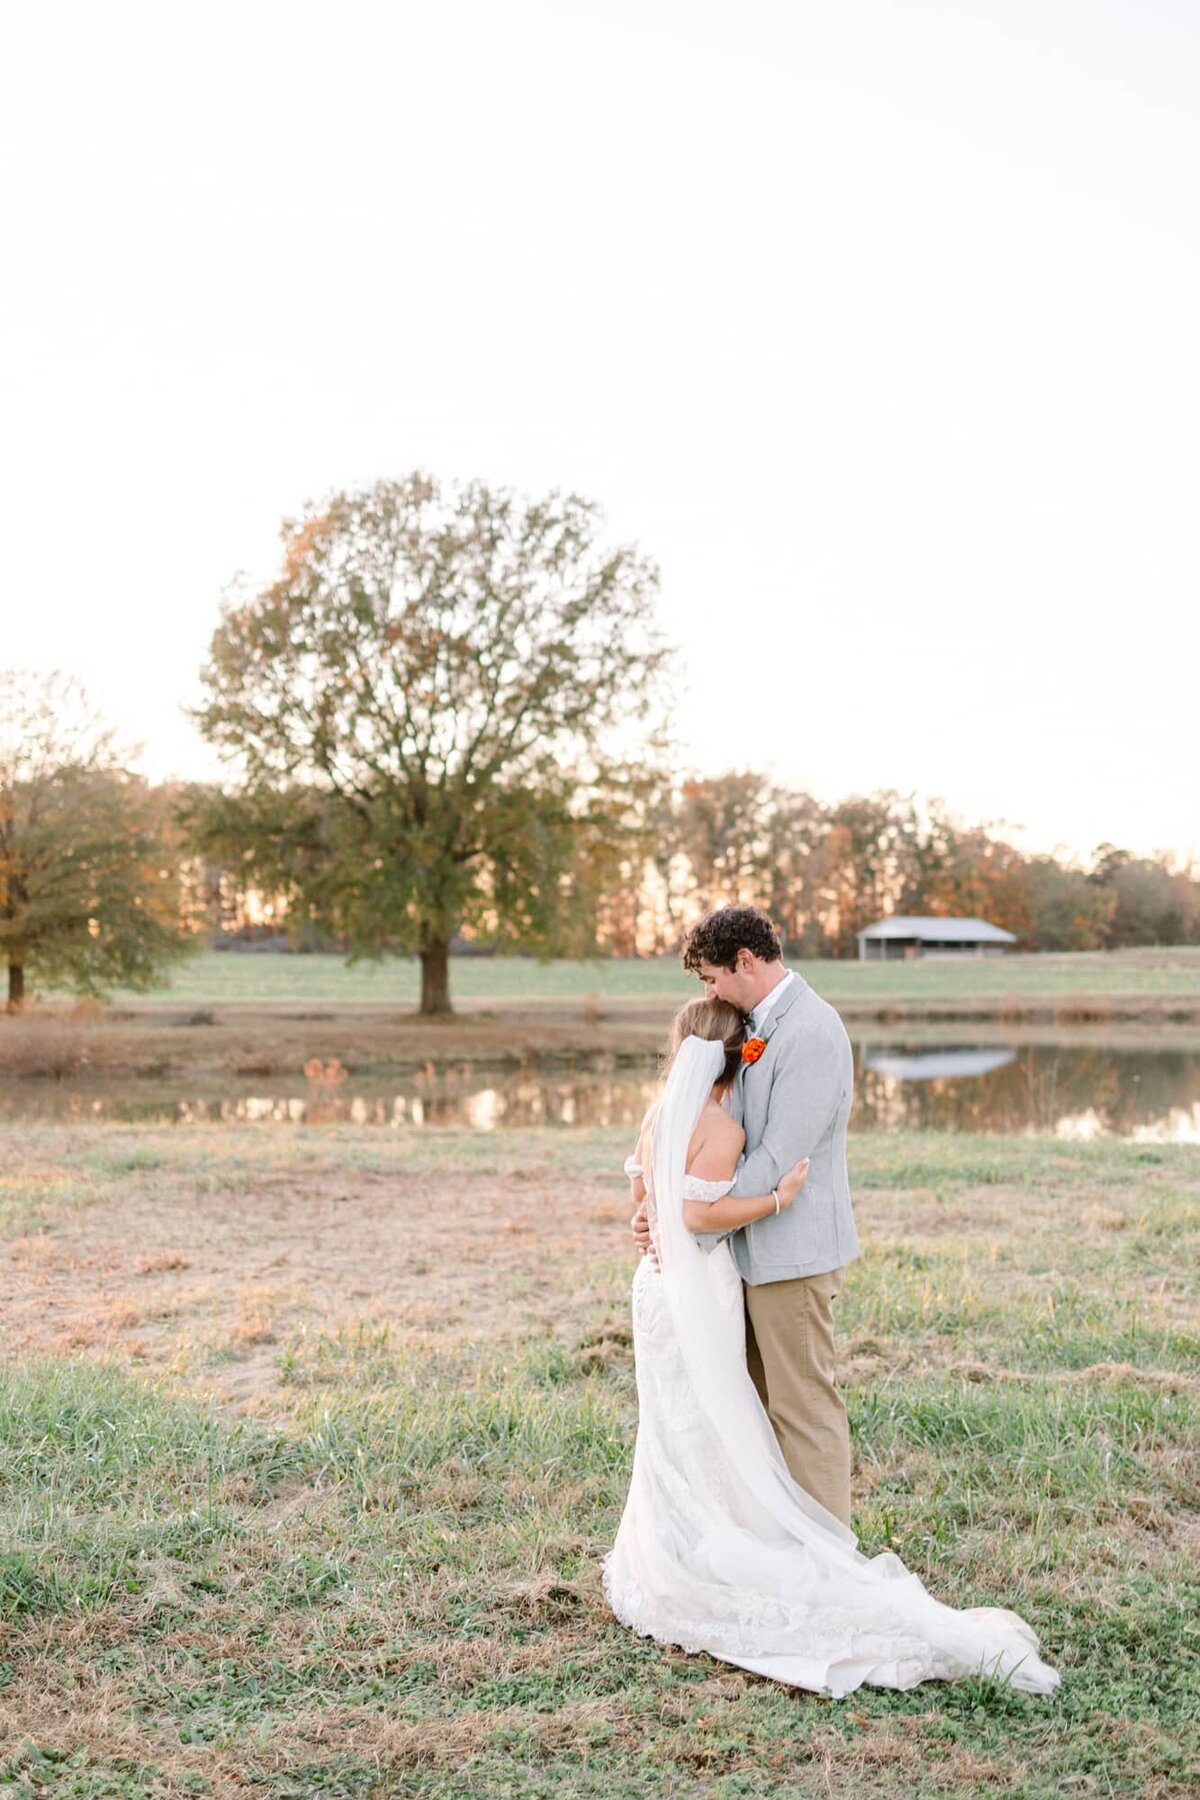 Bride and groom embrace in front of pond and tree at farm wedding near Charlottesville VA